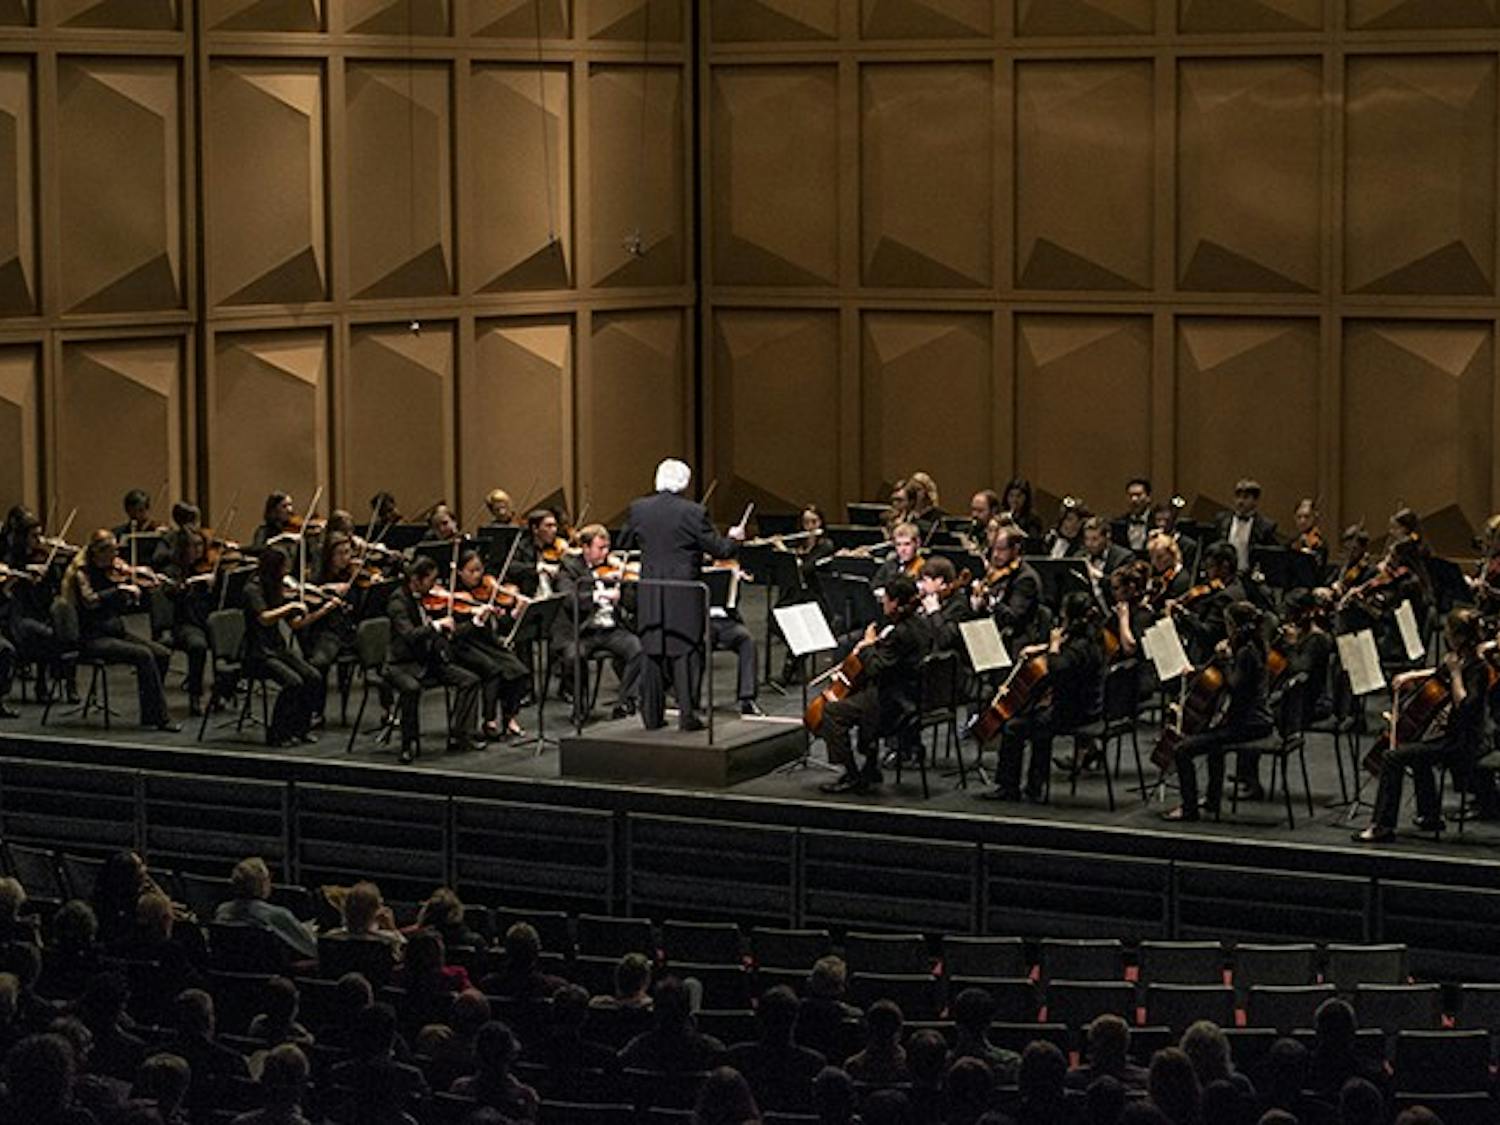 On Tuesday, renowned musician Donald Portnoy conducted the USC Symphony Orchestra All-Beethoven concert.